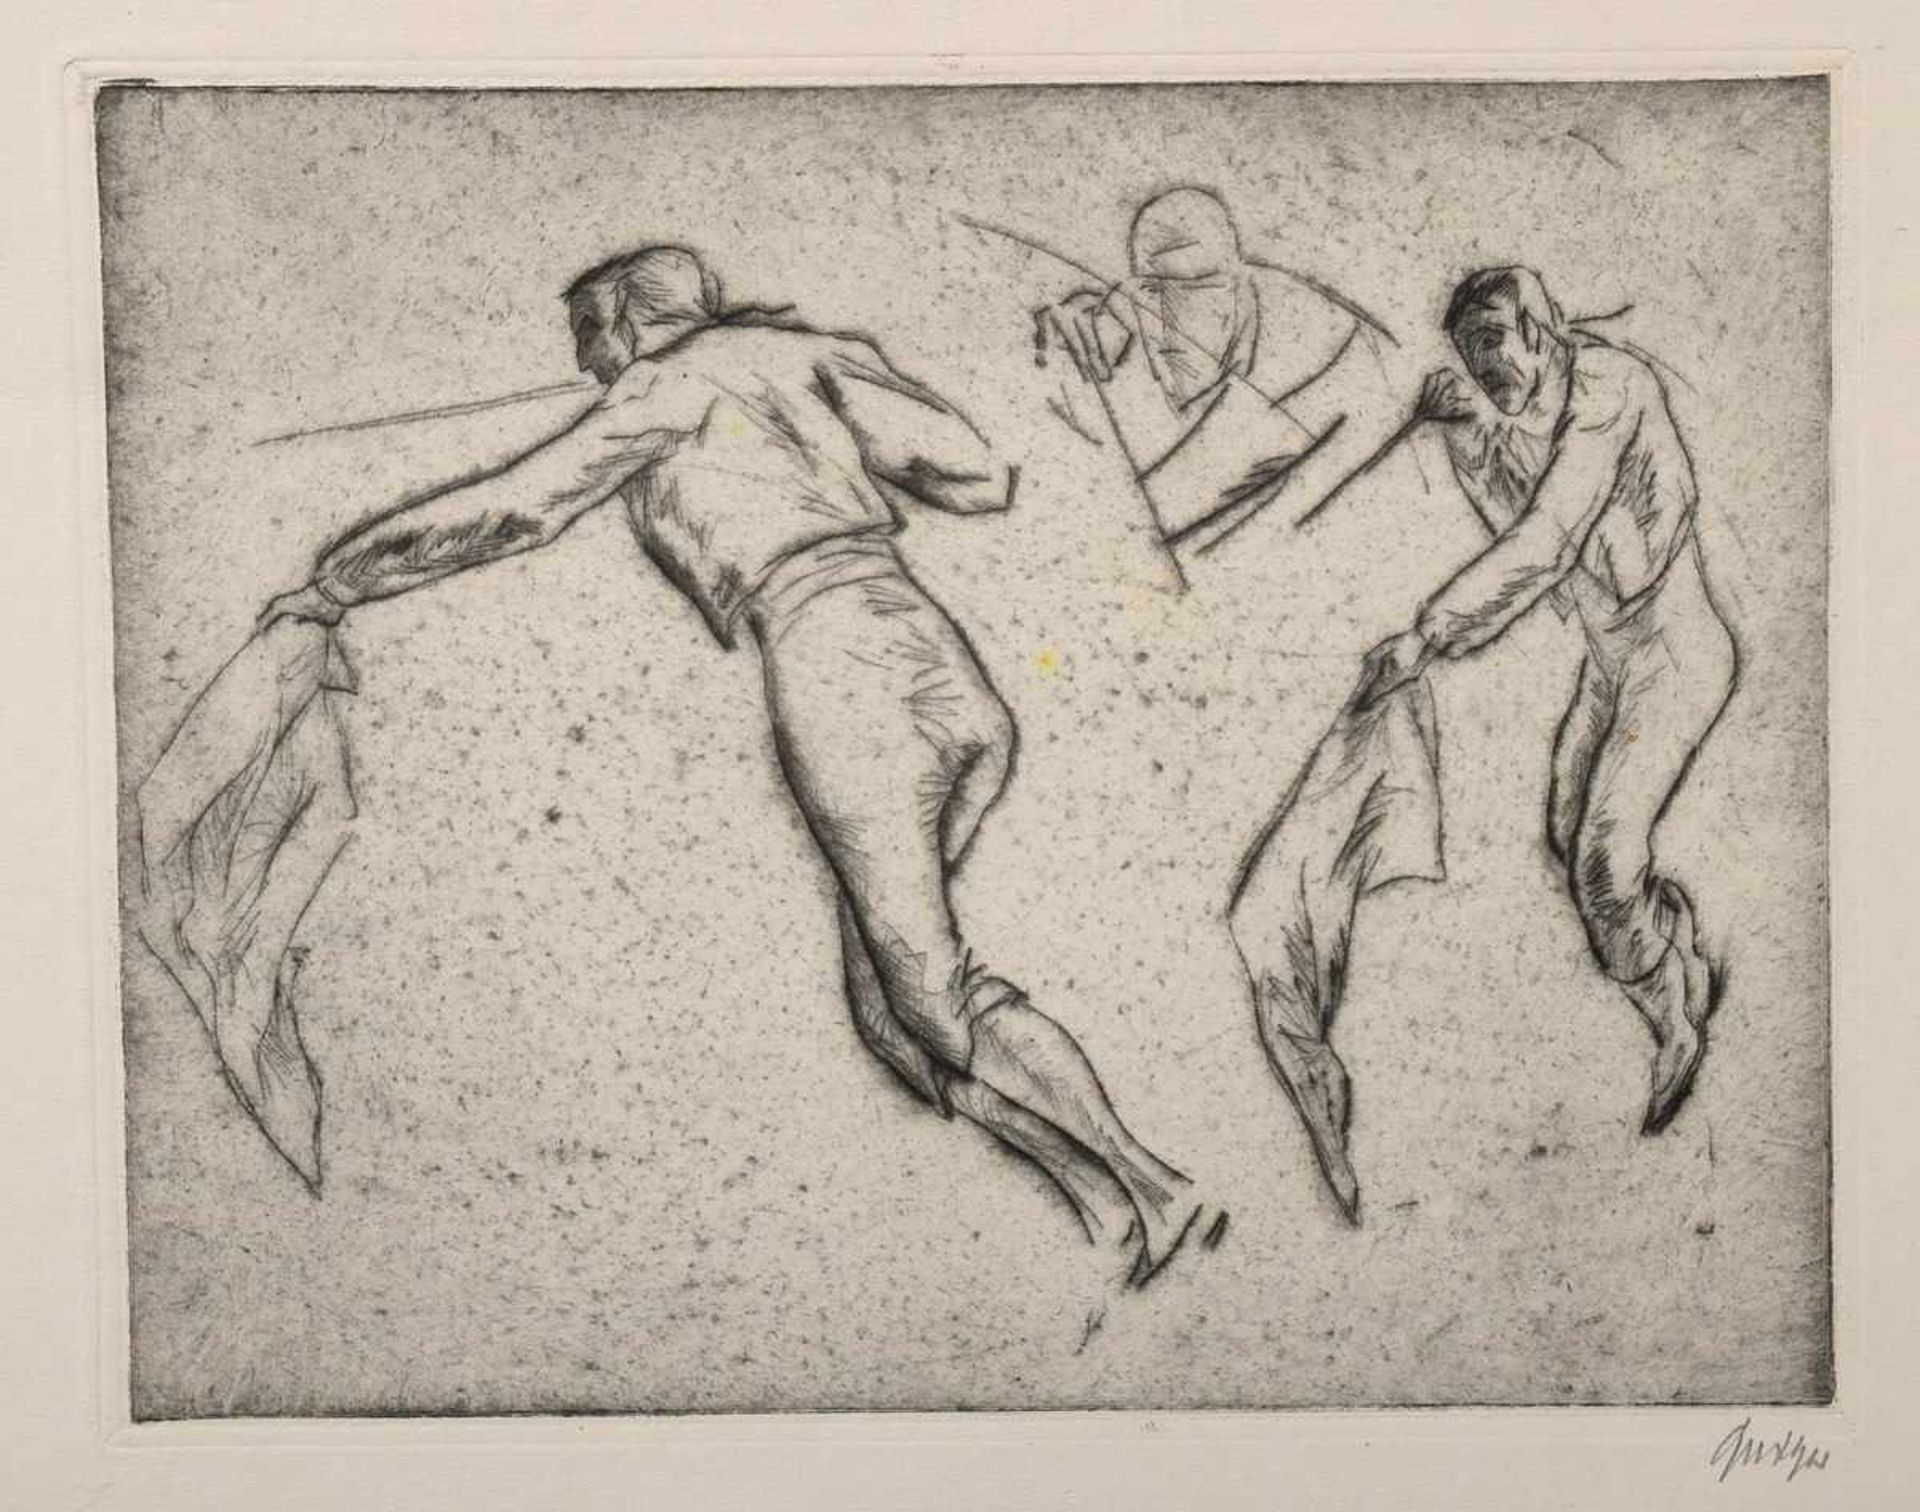 4 Various Geiger, Willi (1878-1971) "Bullfighting scenes", etchings, signed lower right, PD 15, - Bild 3 aus 5